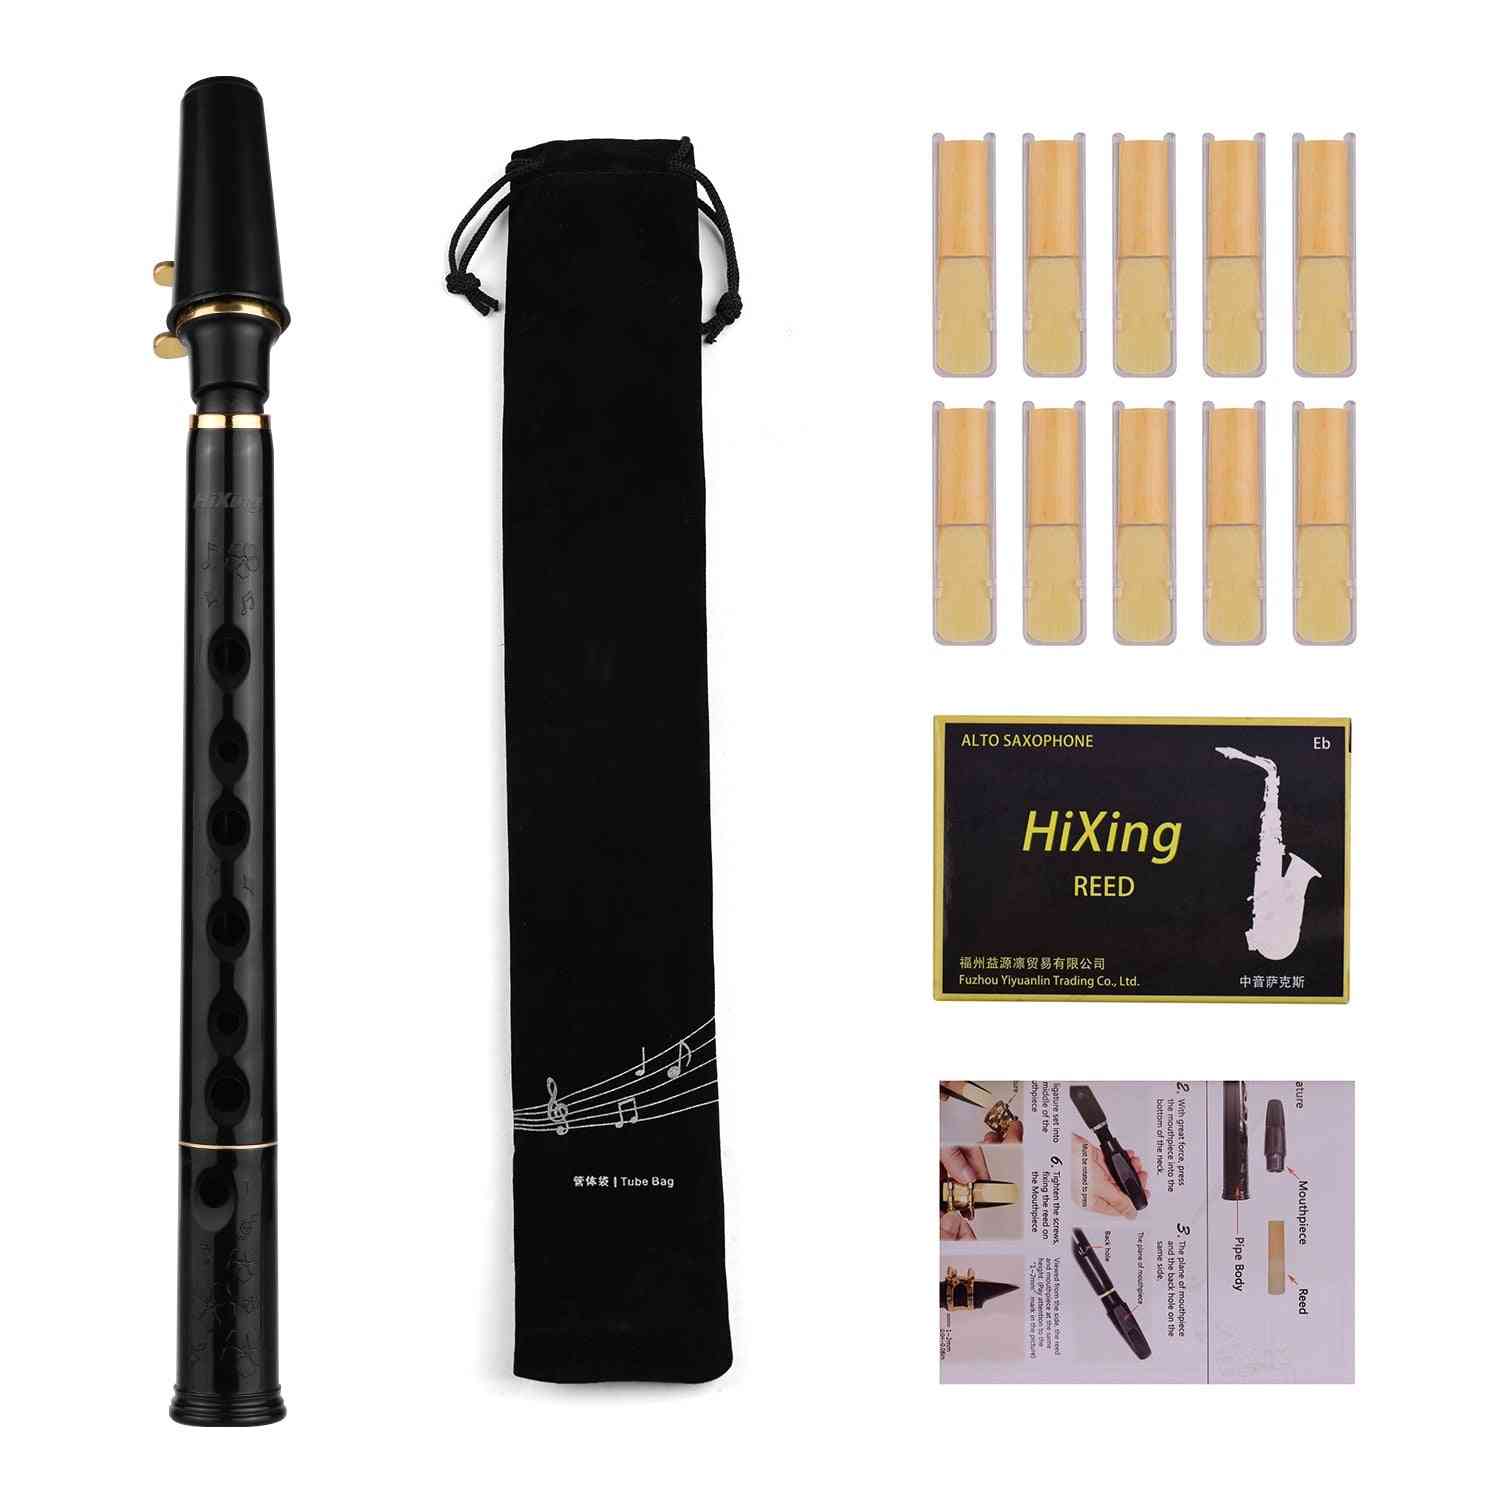 Mini Pocket Saxophone Sax, Abs Material With Mouthpieces, Carrying Bag, Woodwind Instrument